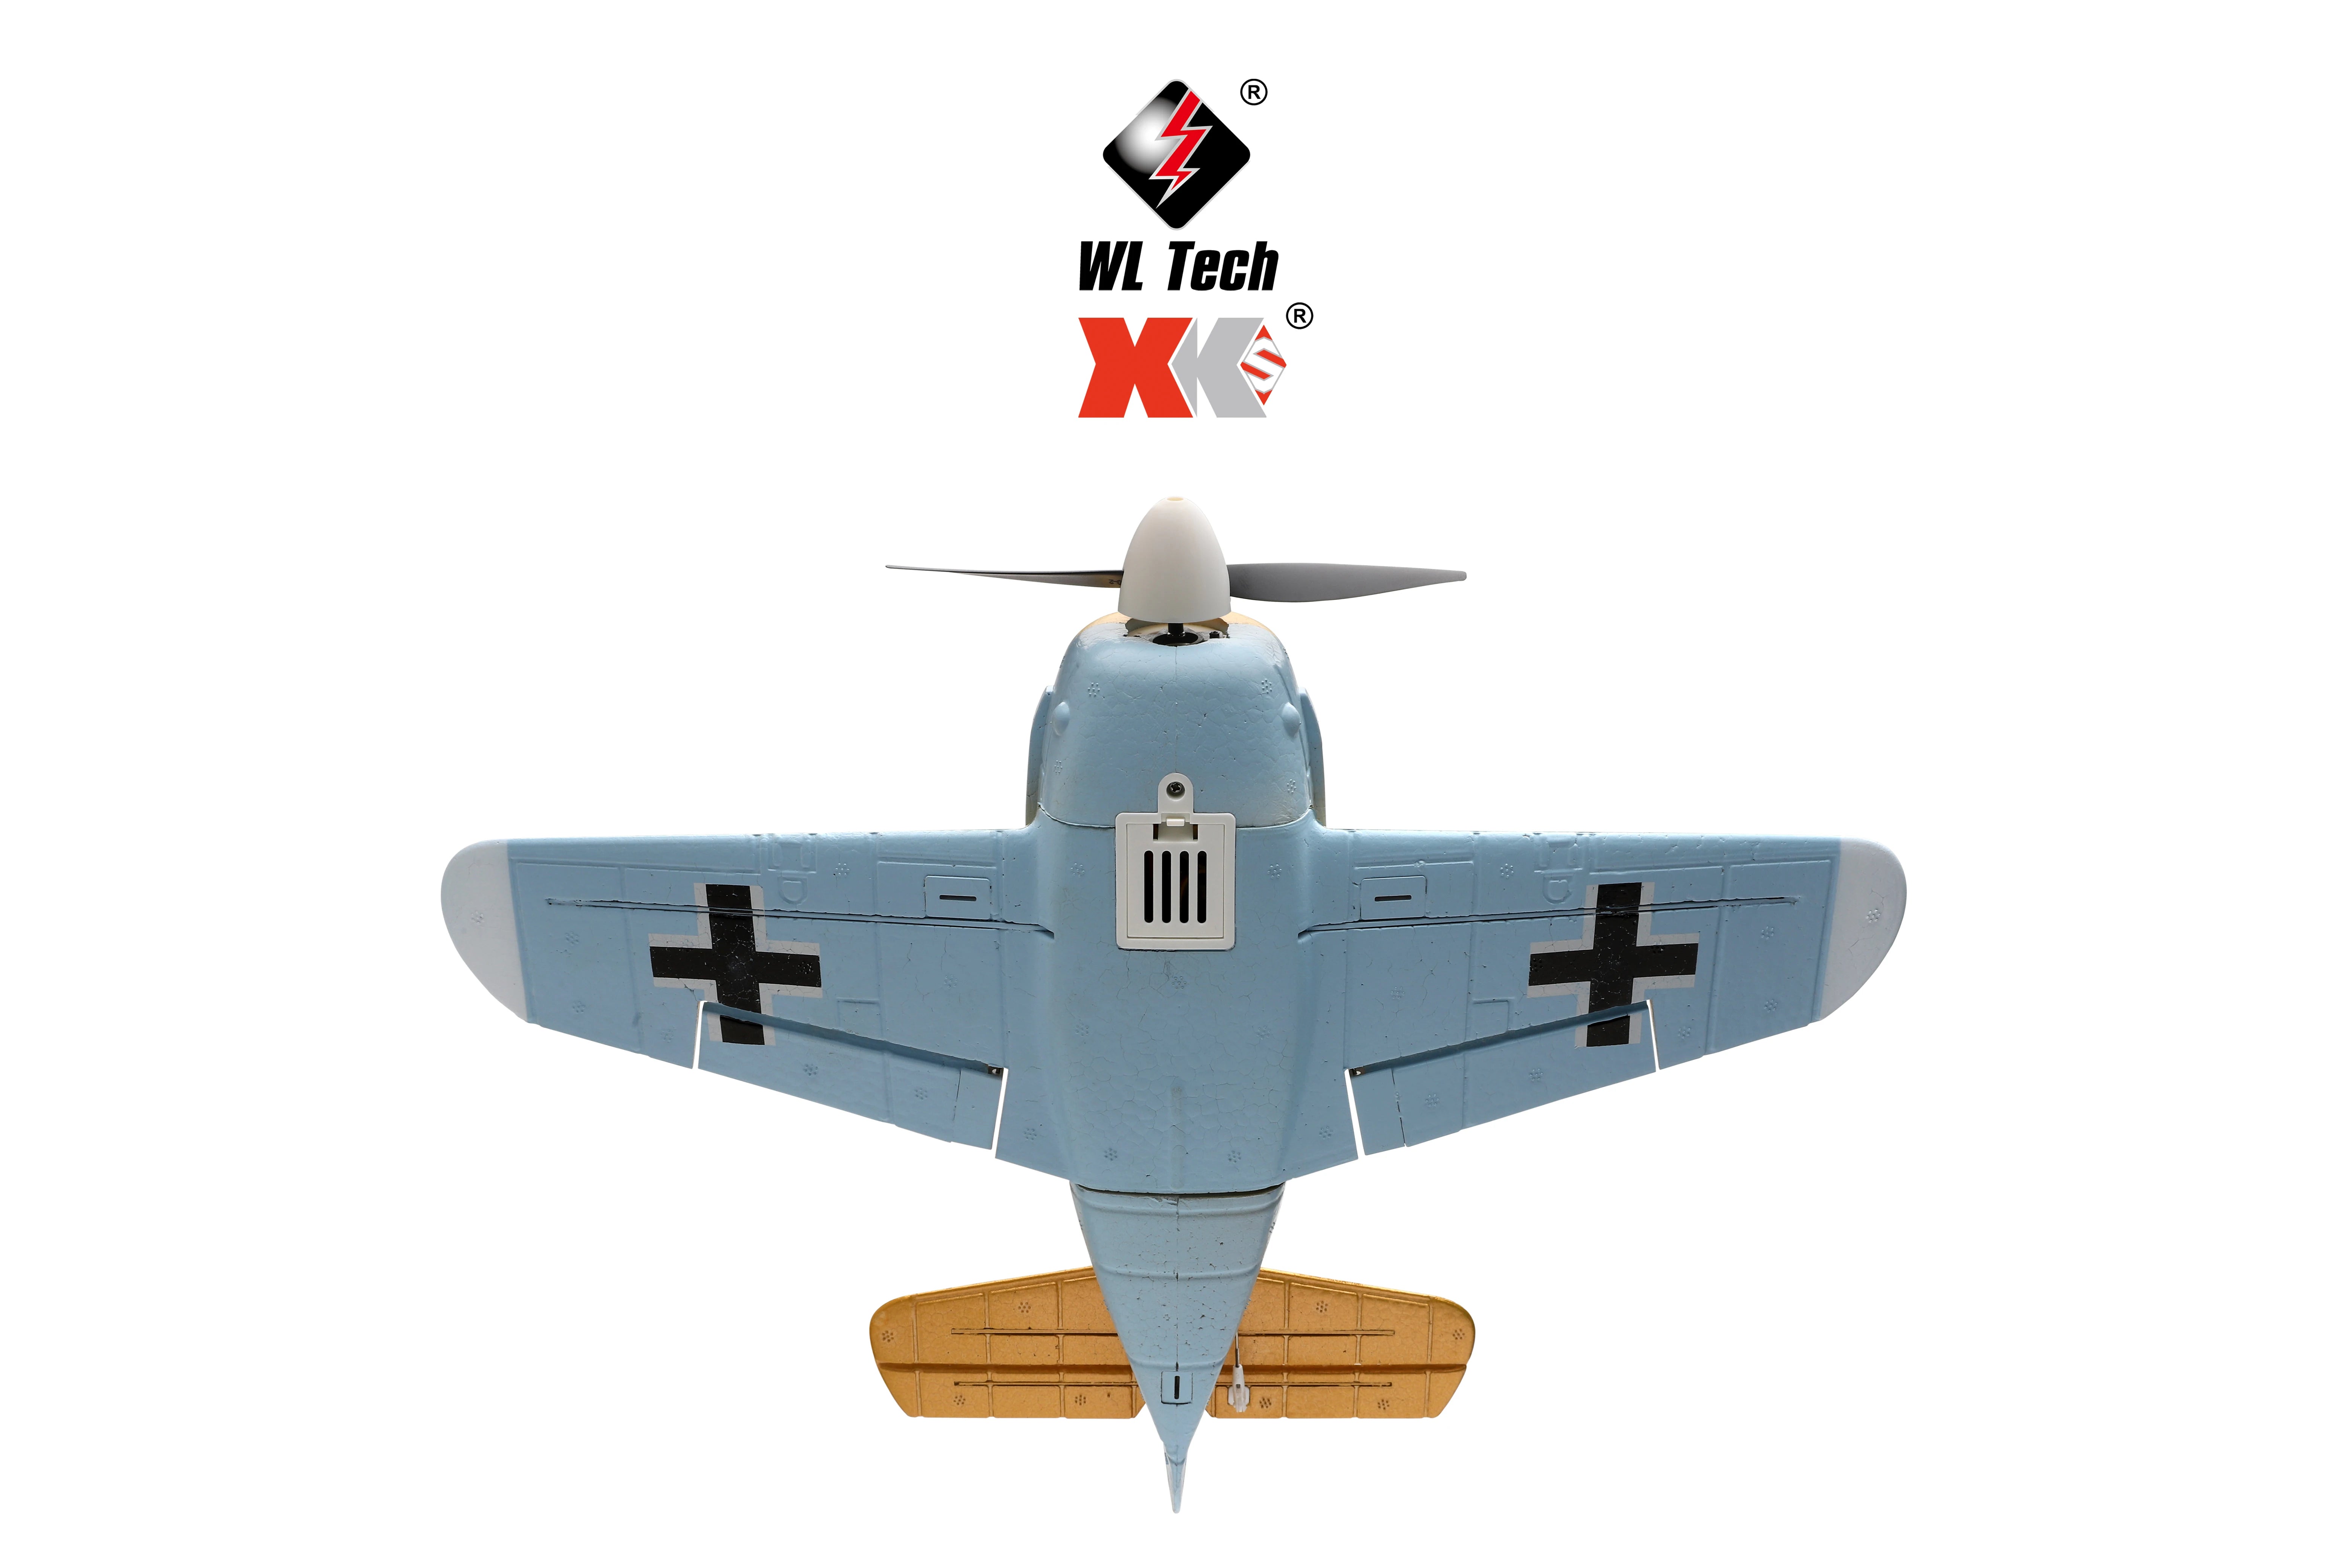 WLtoys XK A500  A250 RC Plane, the upper part of the plane is dark blue and the lower part is light blue to show the